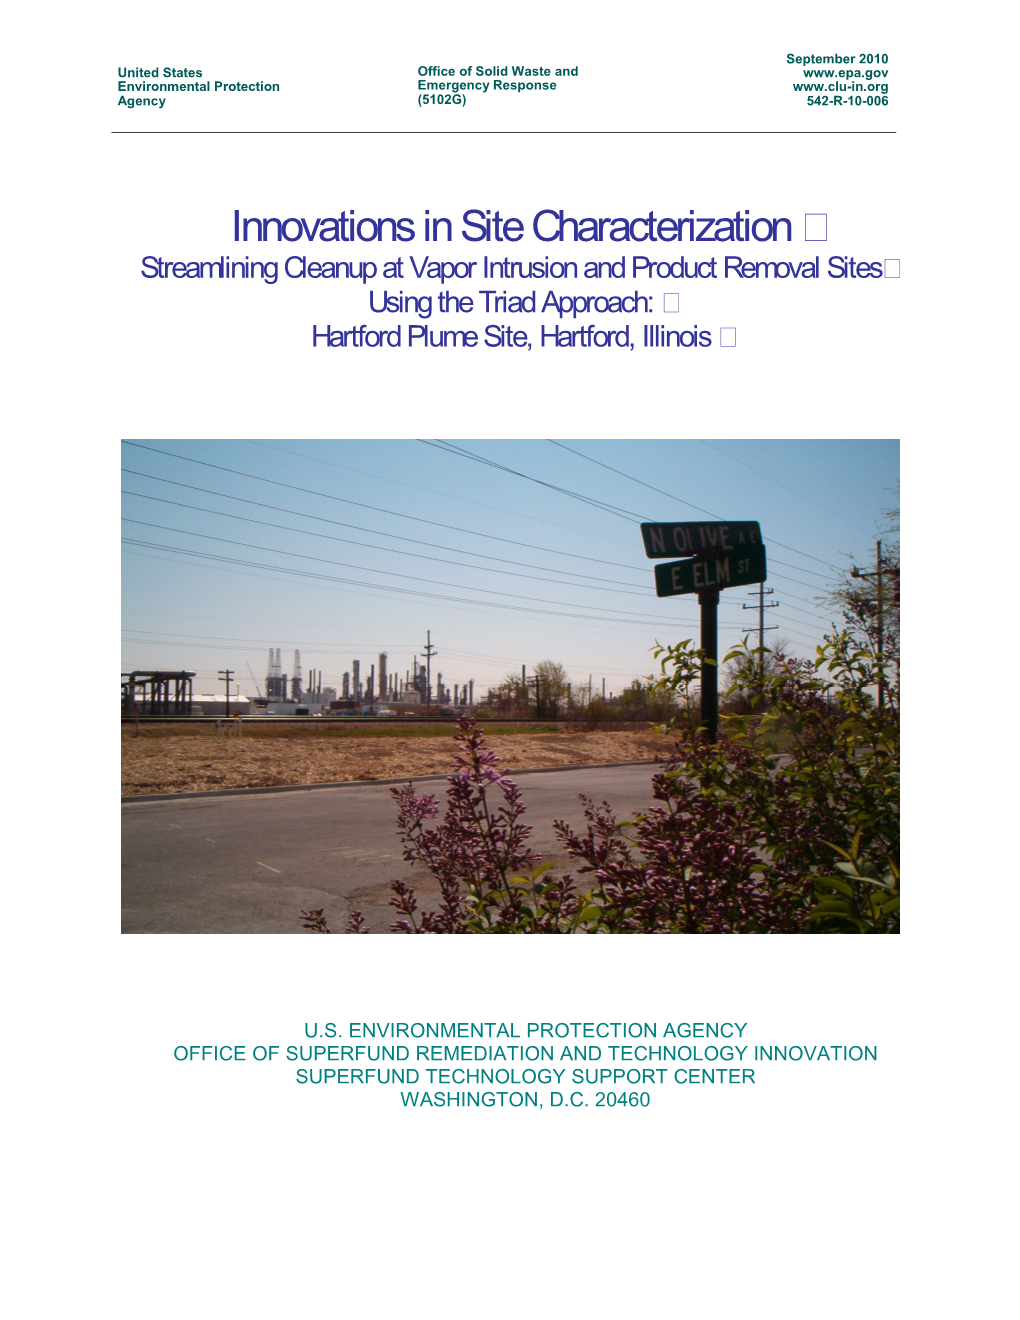 Innovations in Site Characterization: Streamlining Cleanup at Vapor